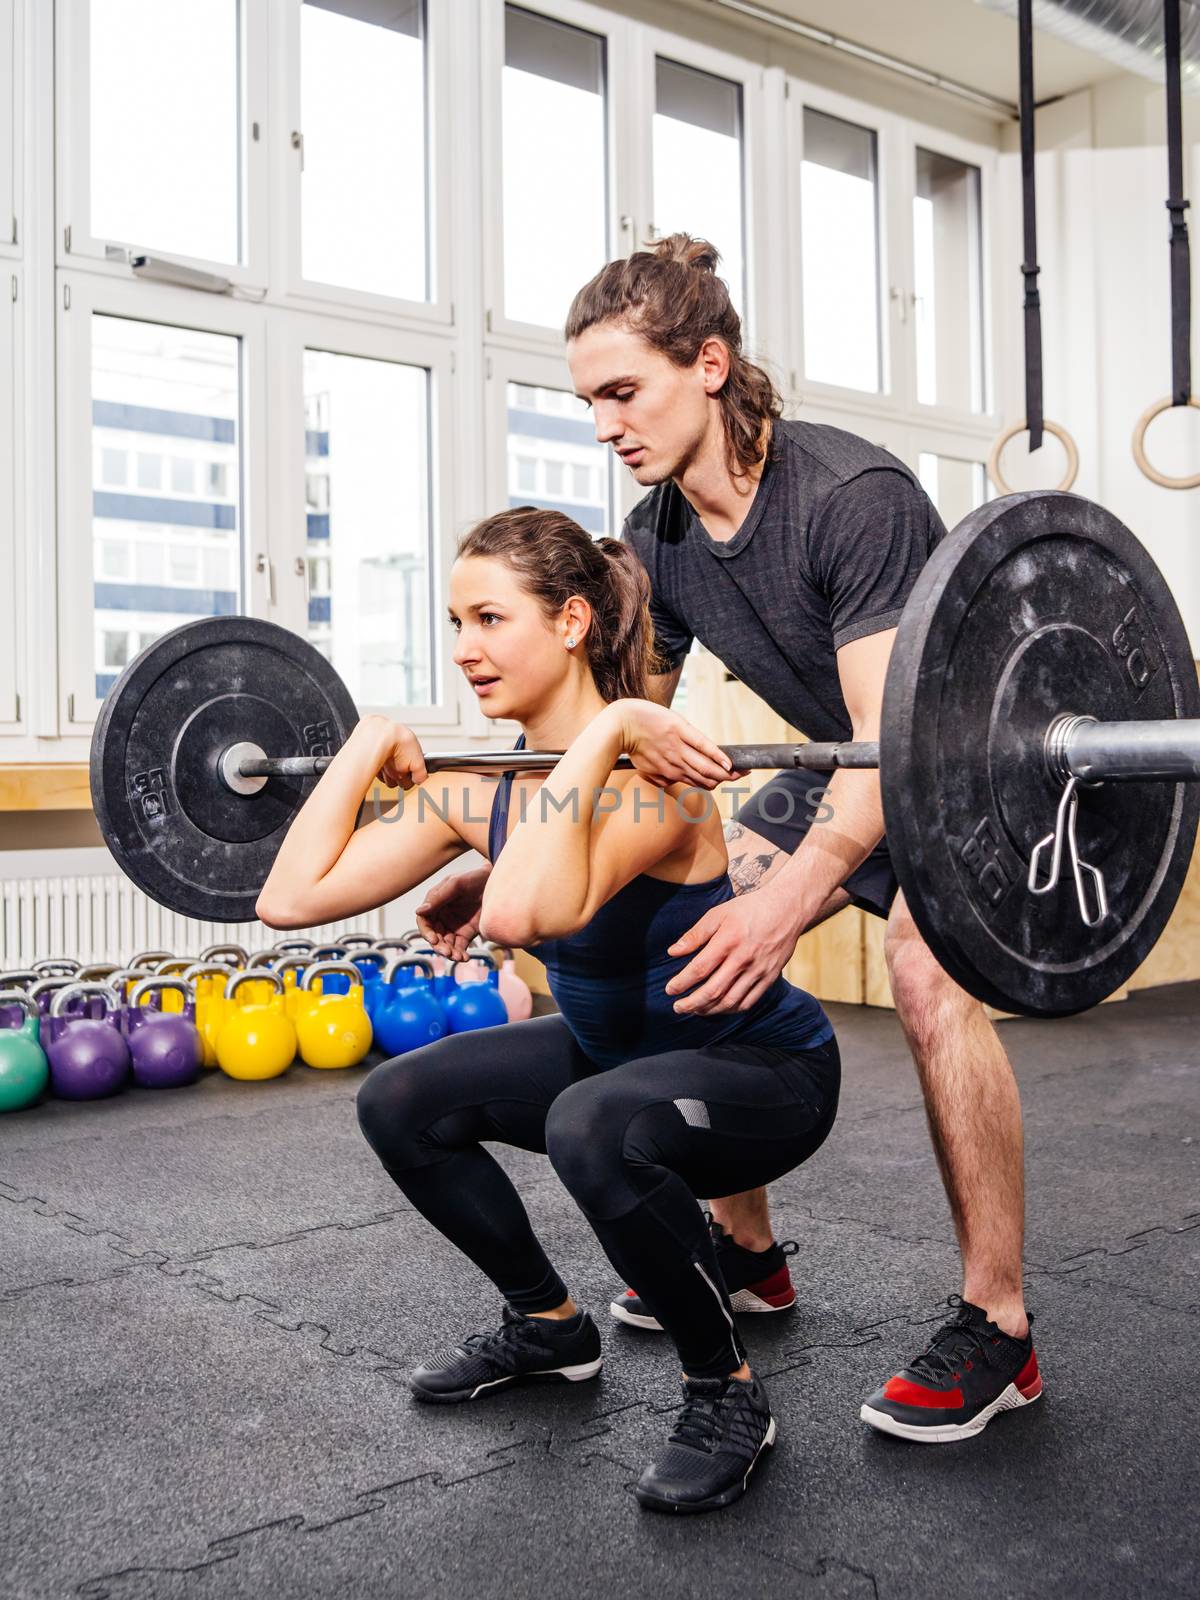 Woman doing squats at crossfit gym by sumners